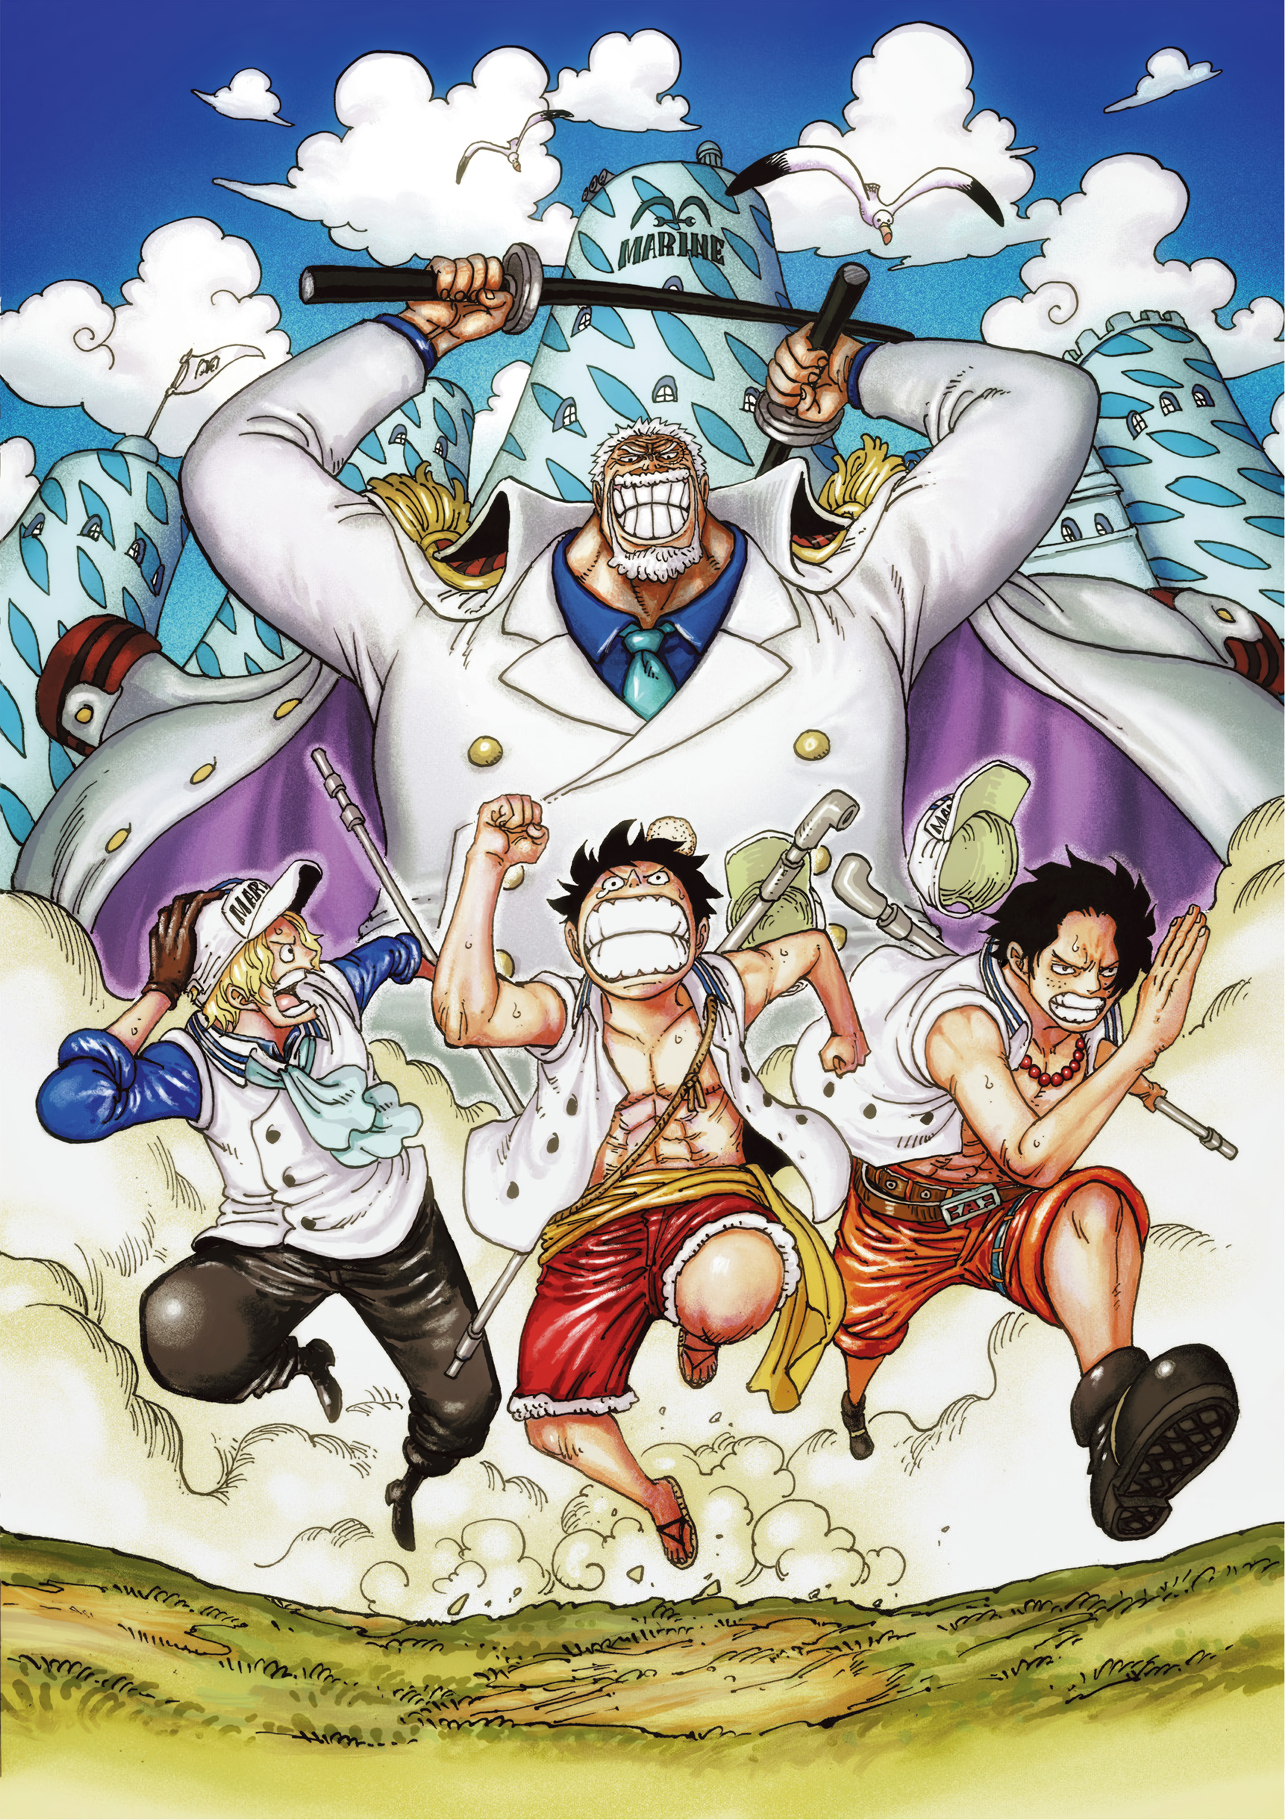 Mh5, A voyage [One piece various x reader/oc]